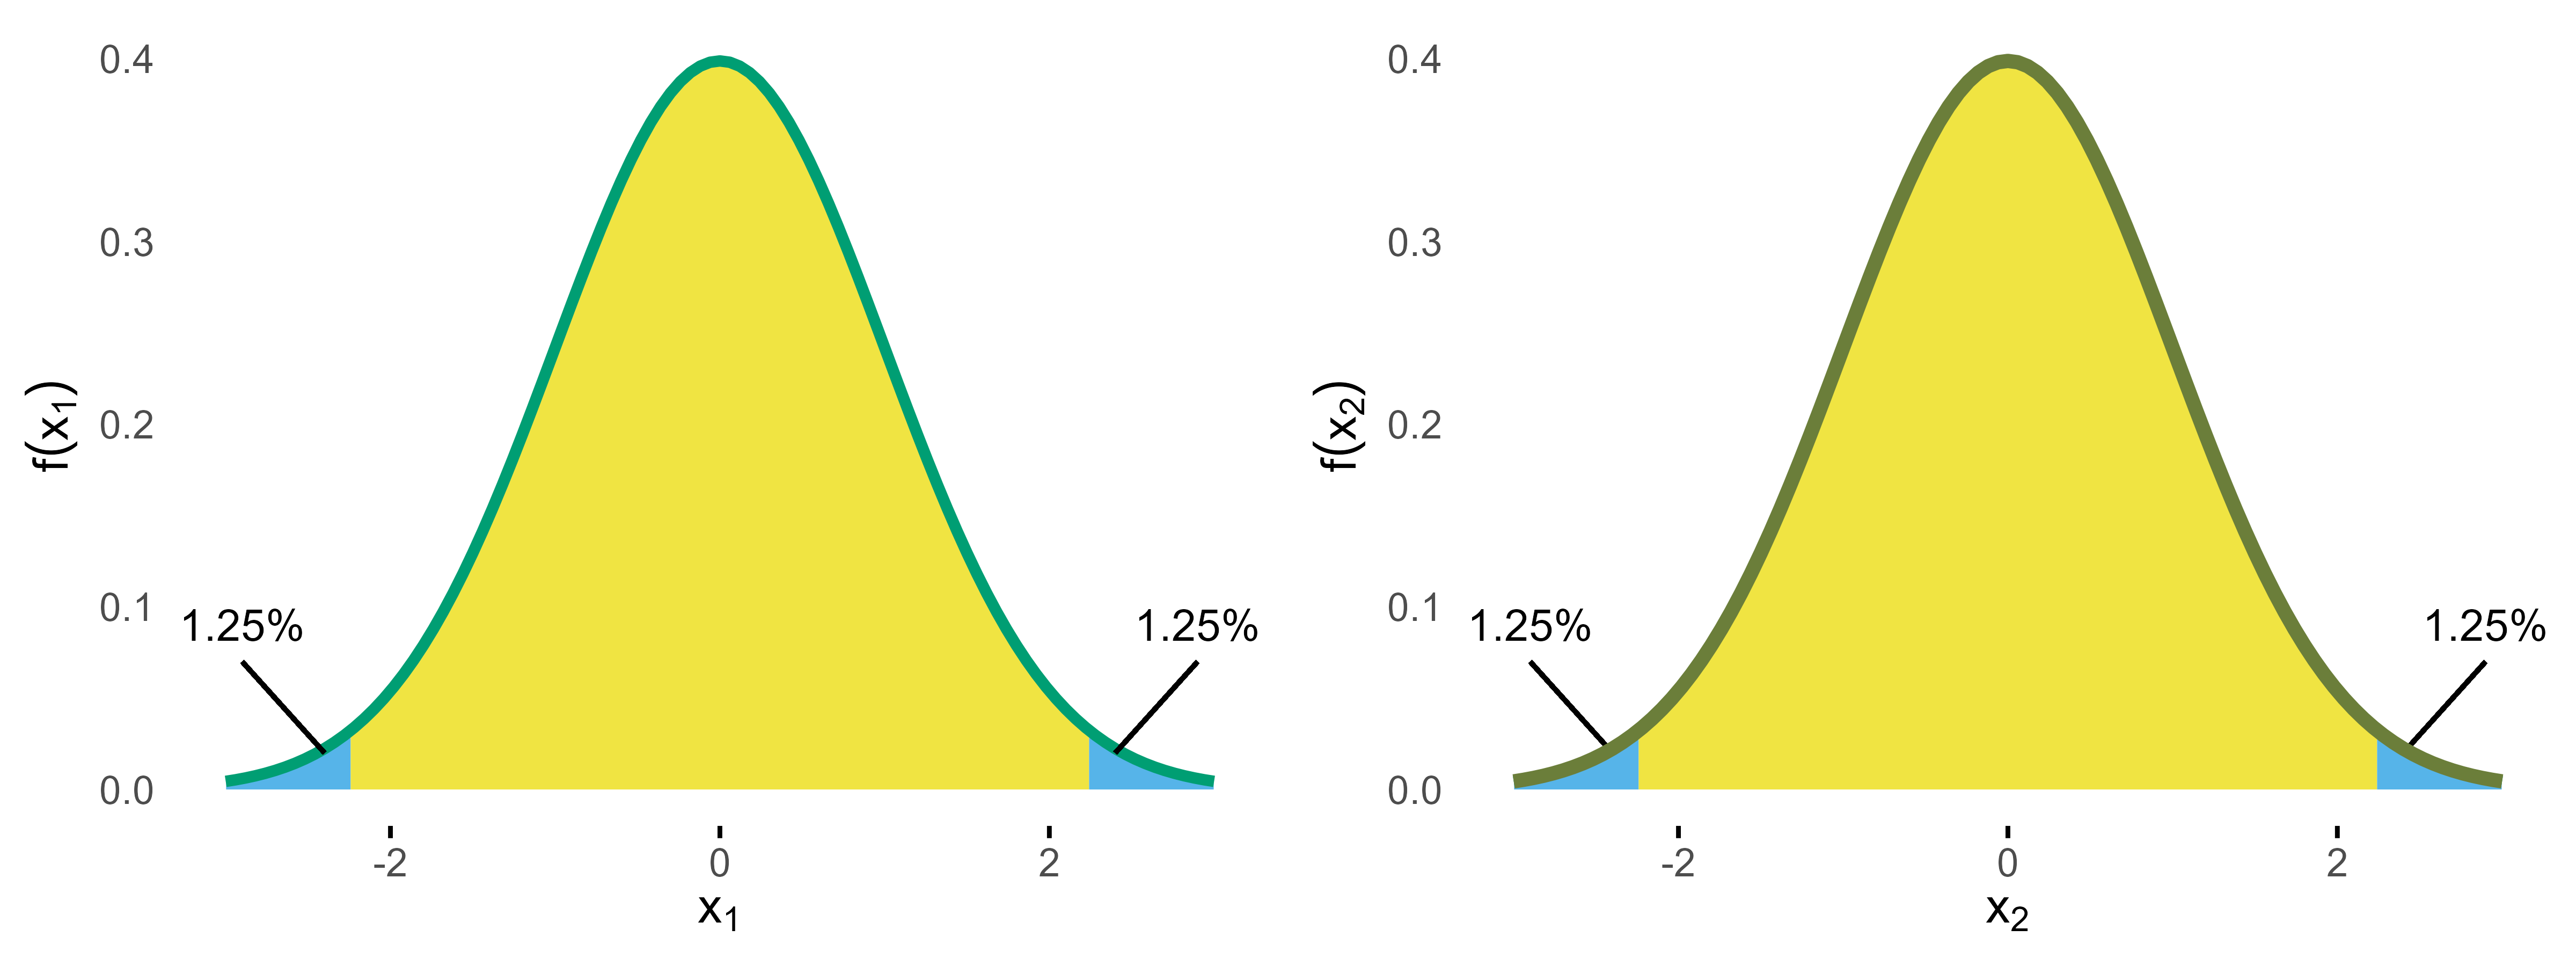 Normal densities for stage 1 and 2 with Bonferroni bounds.